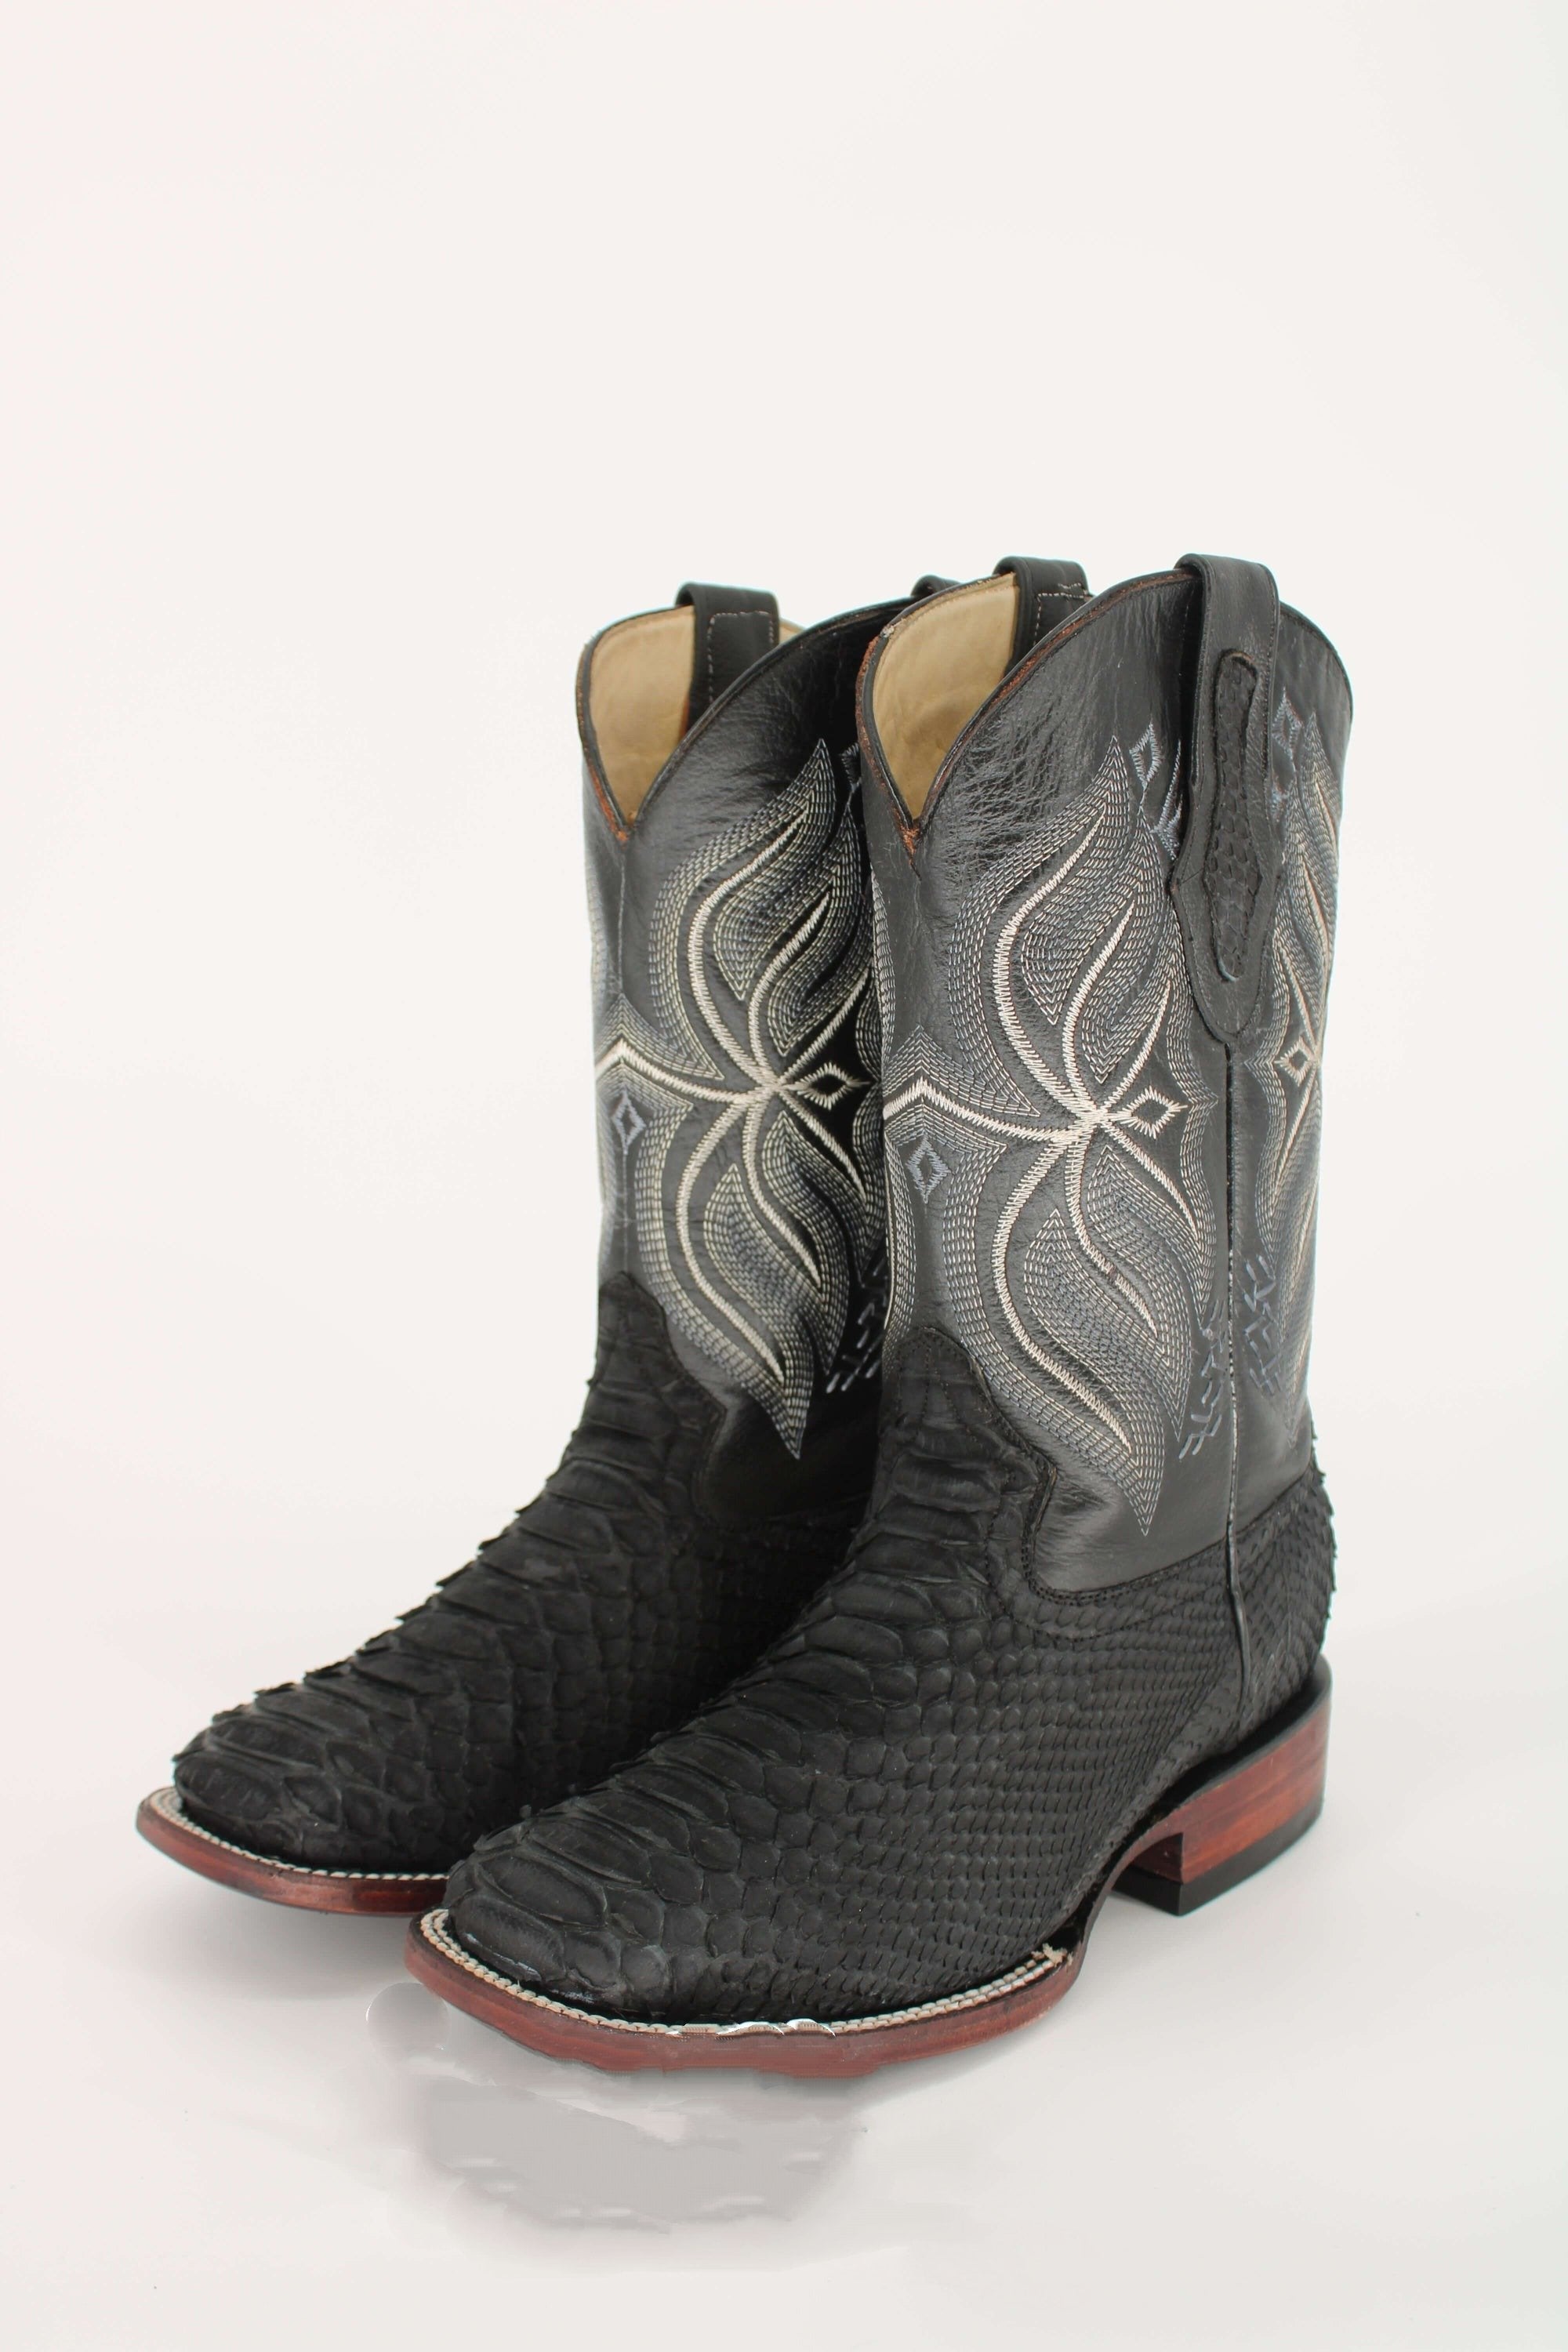 Men's Embroidery Cowboy Boots Vintage Western Boots